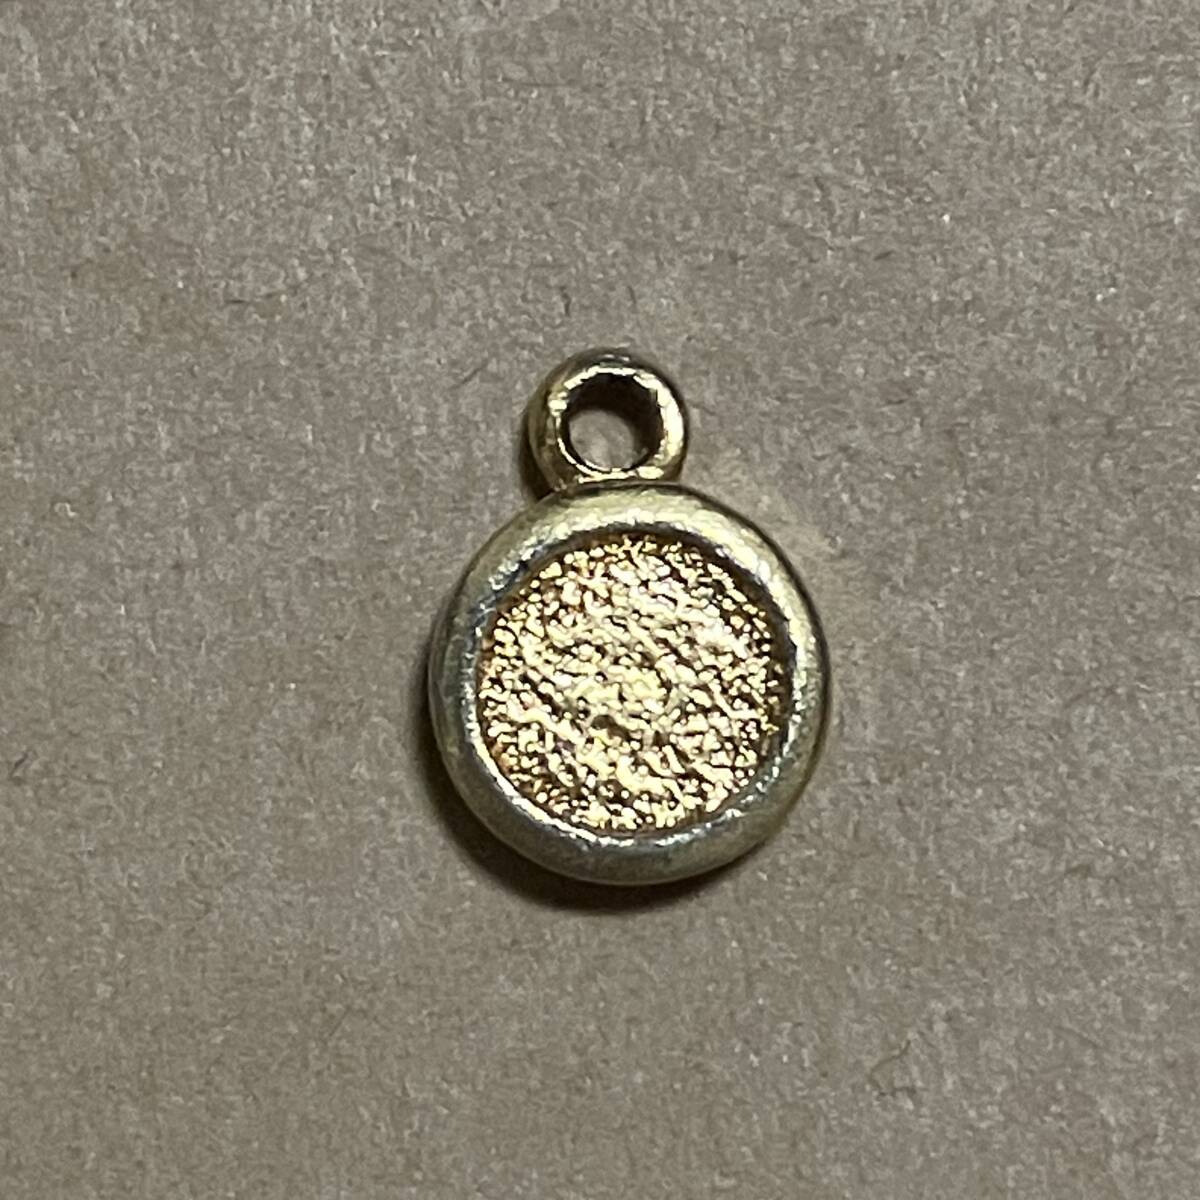 used Christian Dior Dior pendant top approximately 14mm gold color 